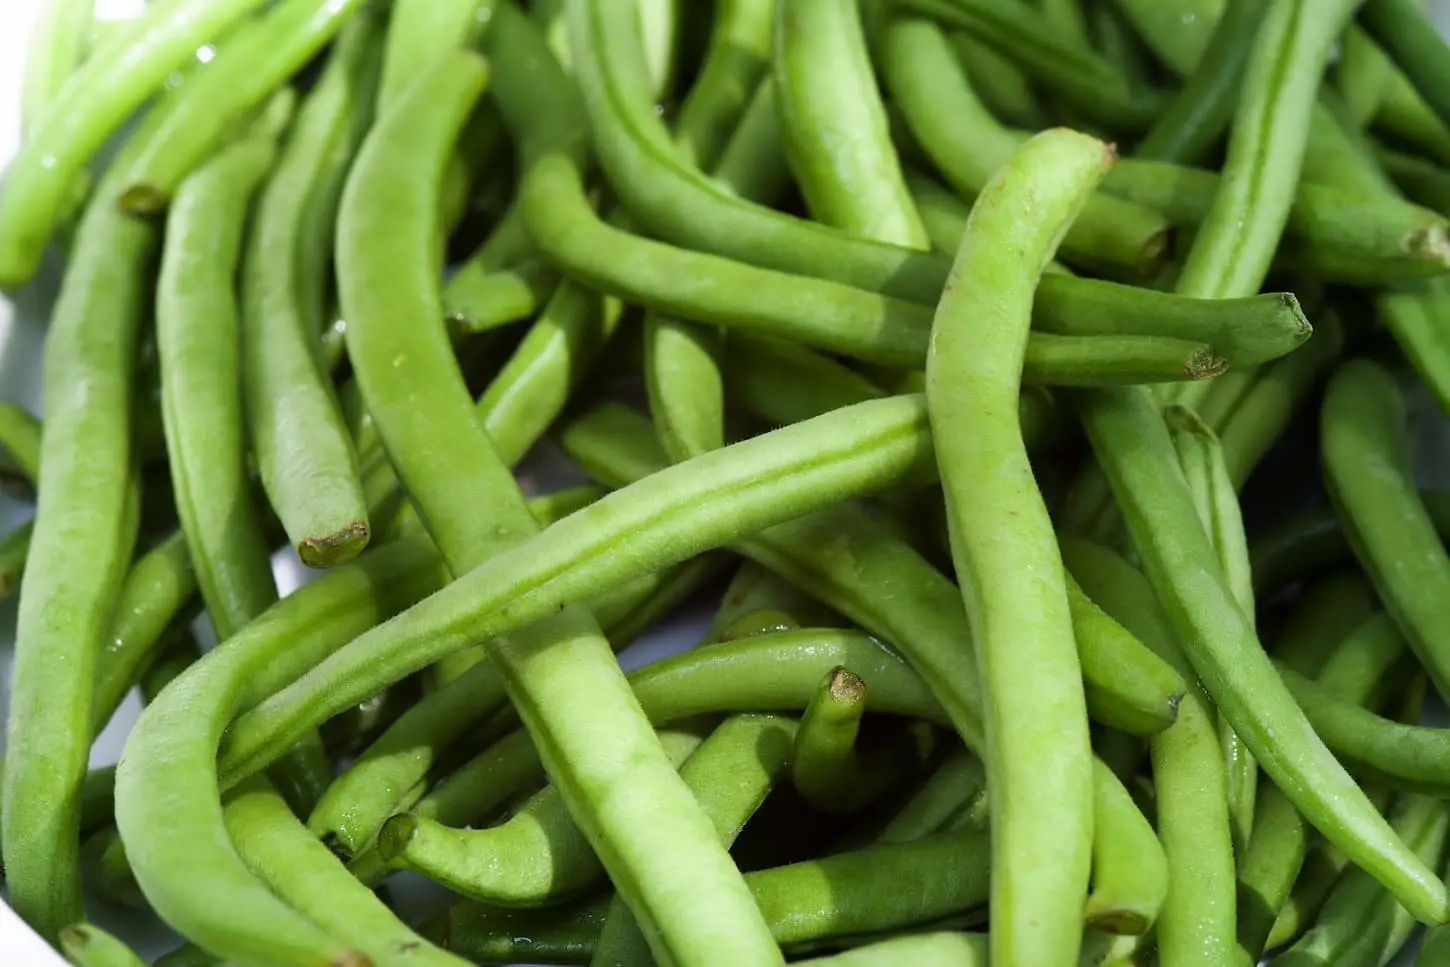 An image of fresh green string beans.